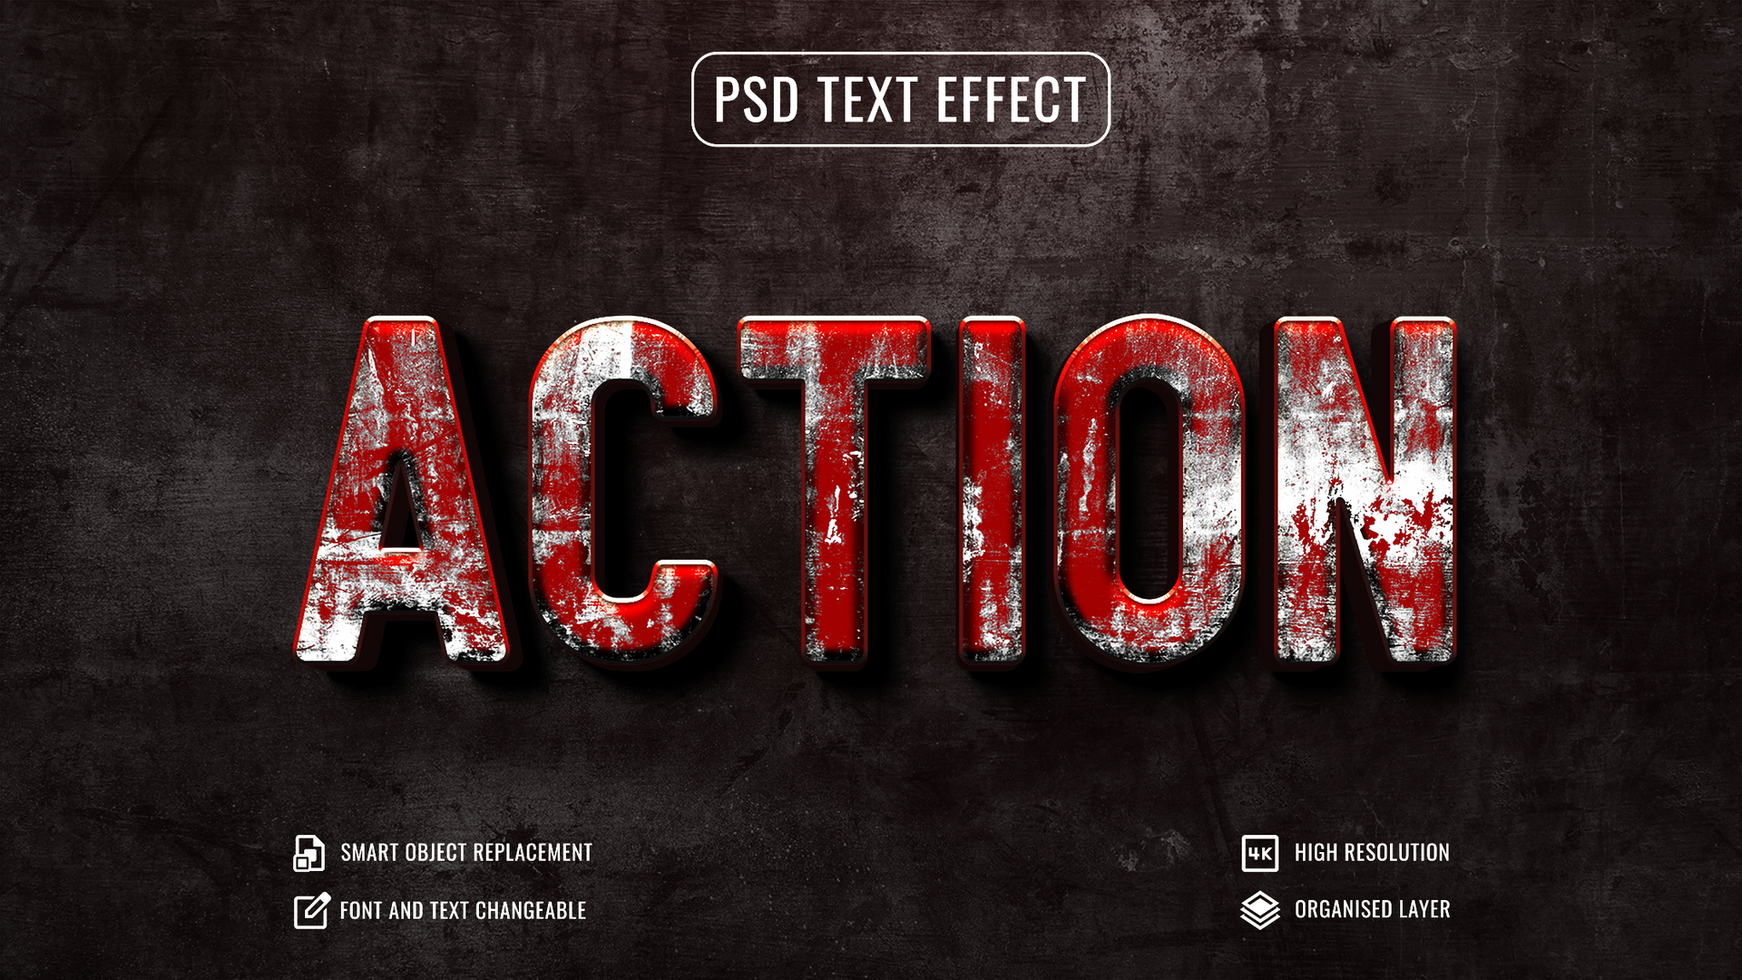 action text effect with grunge texture background psd